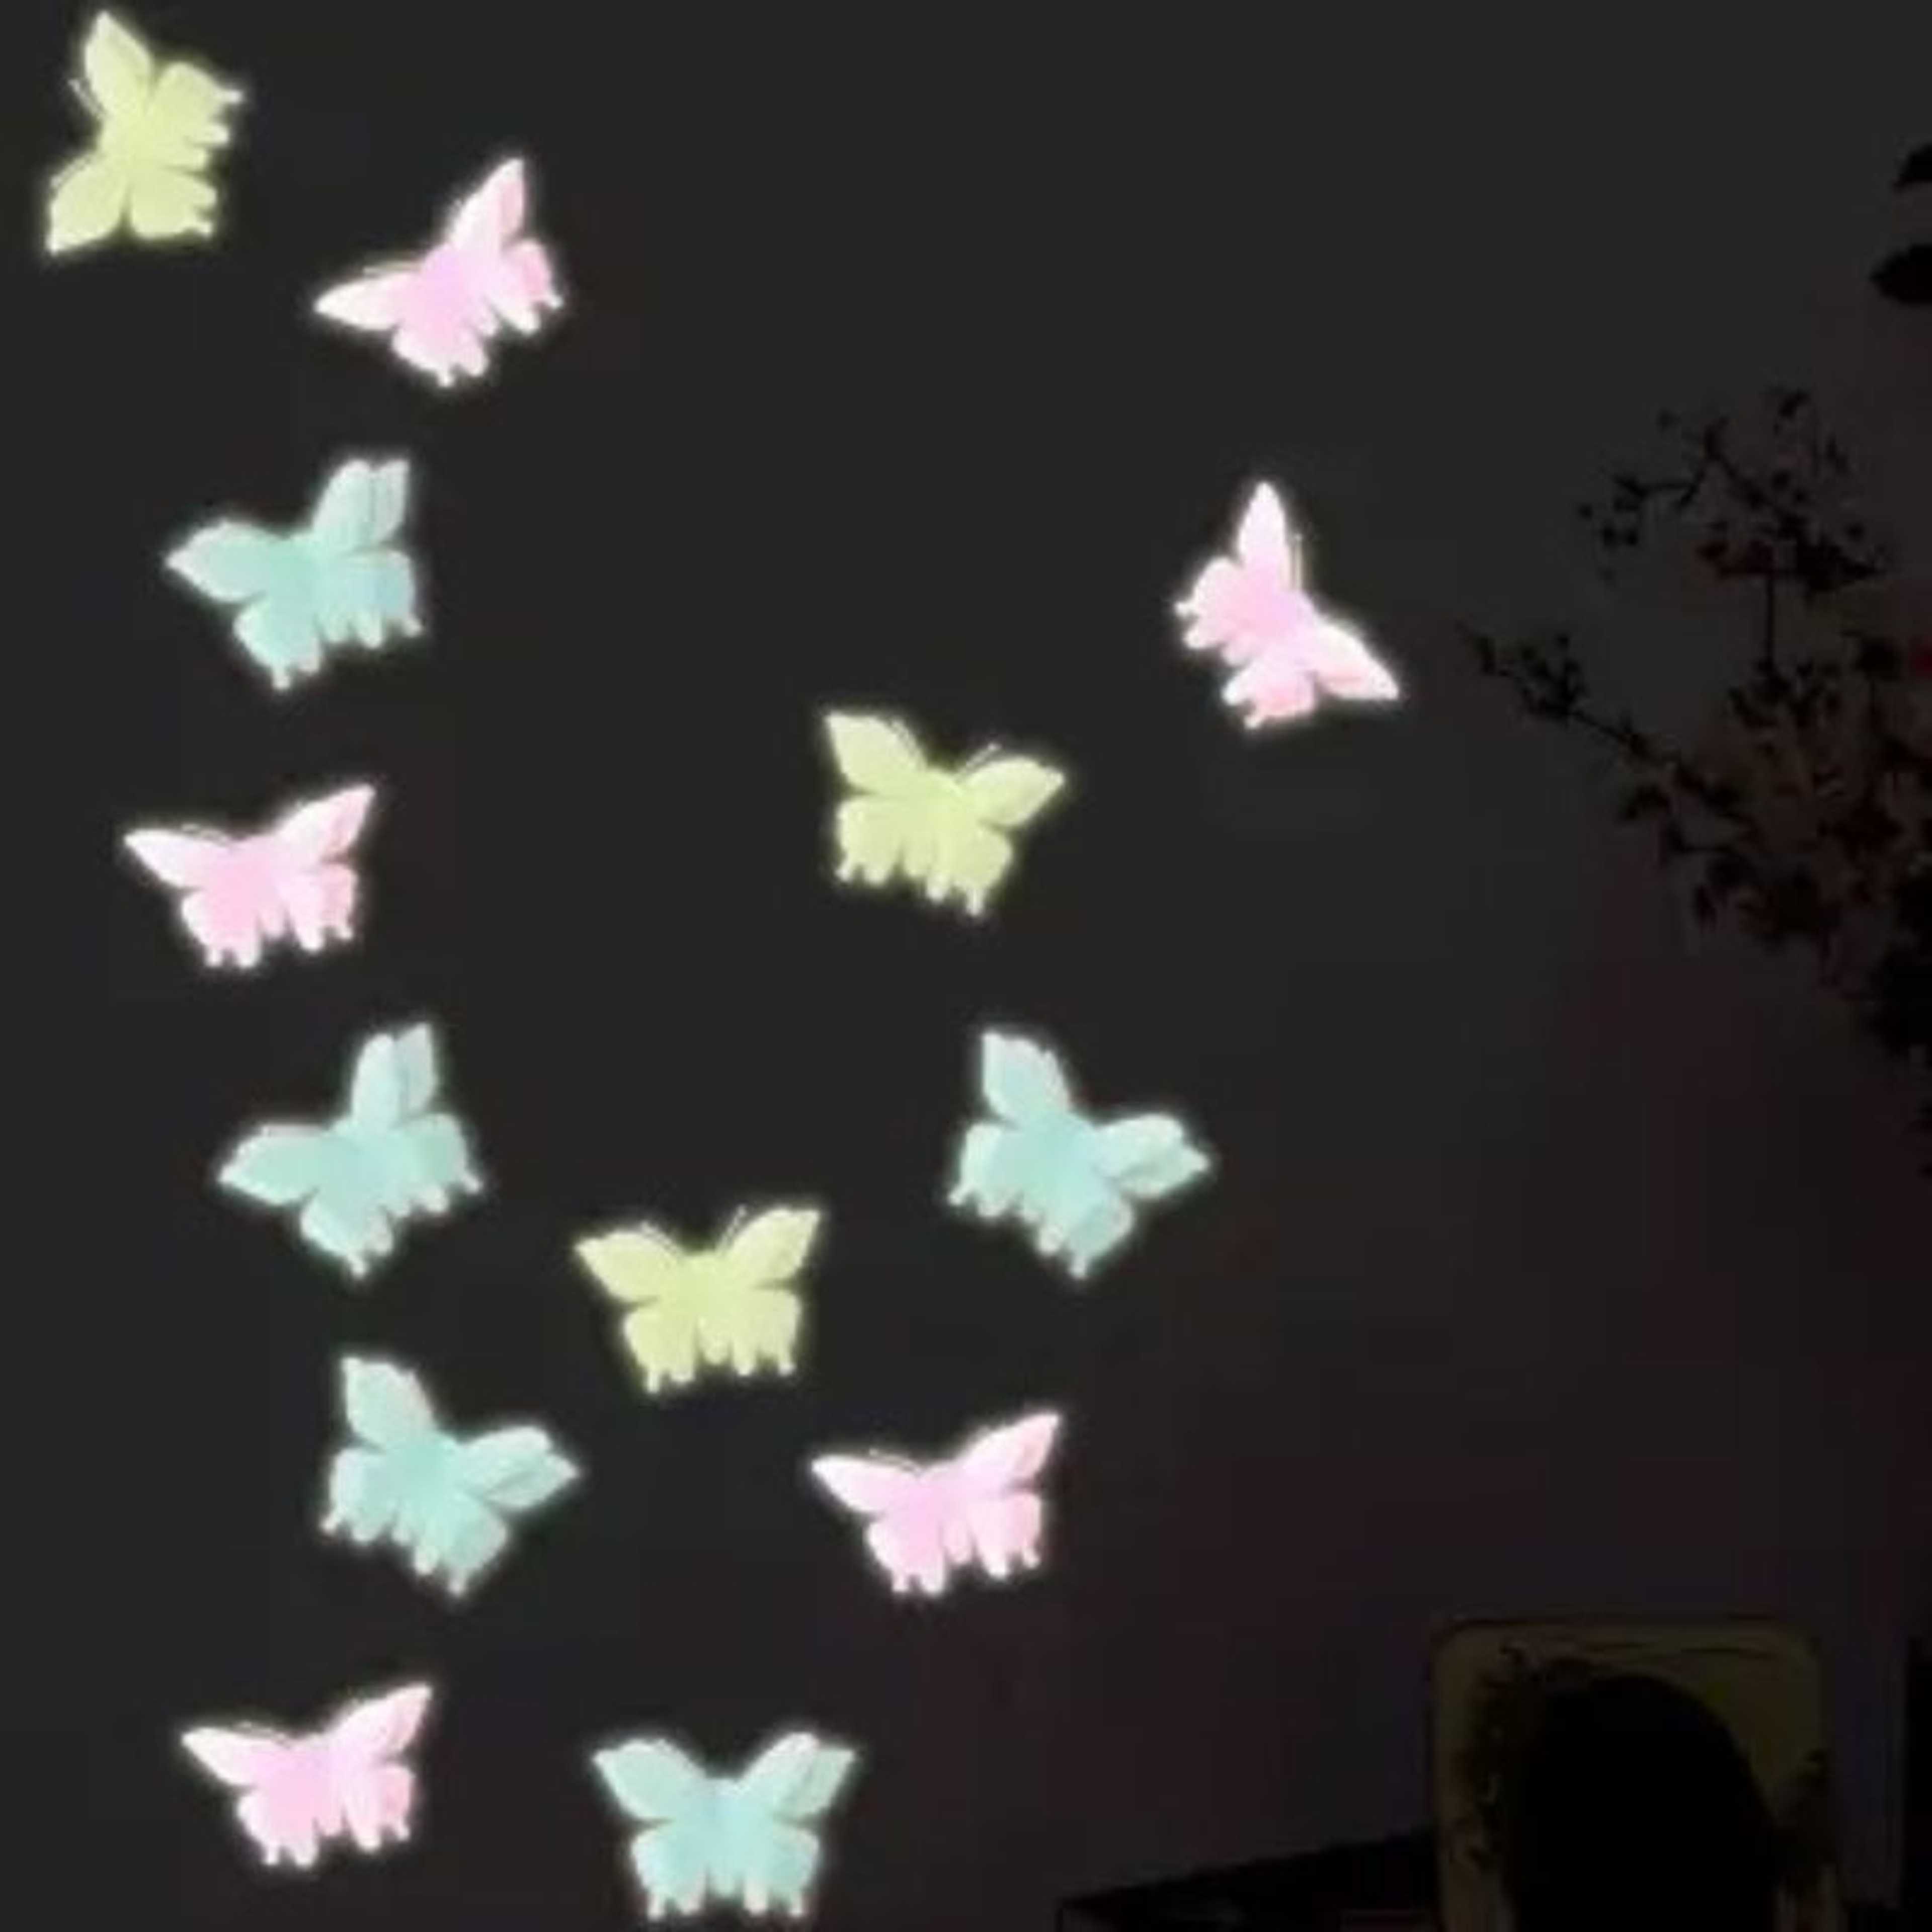 Pack of 8 - Random Color Fluorescent Night Glowing Butterfly Wall Stickers, Butterfly Luminous Wall Stickers Glow in The Dark Stickers